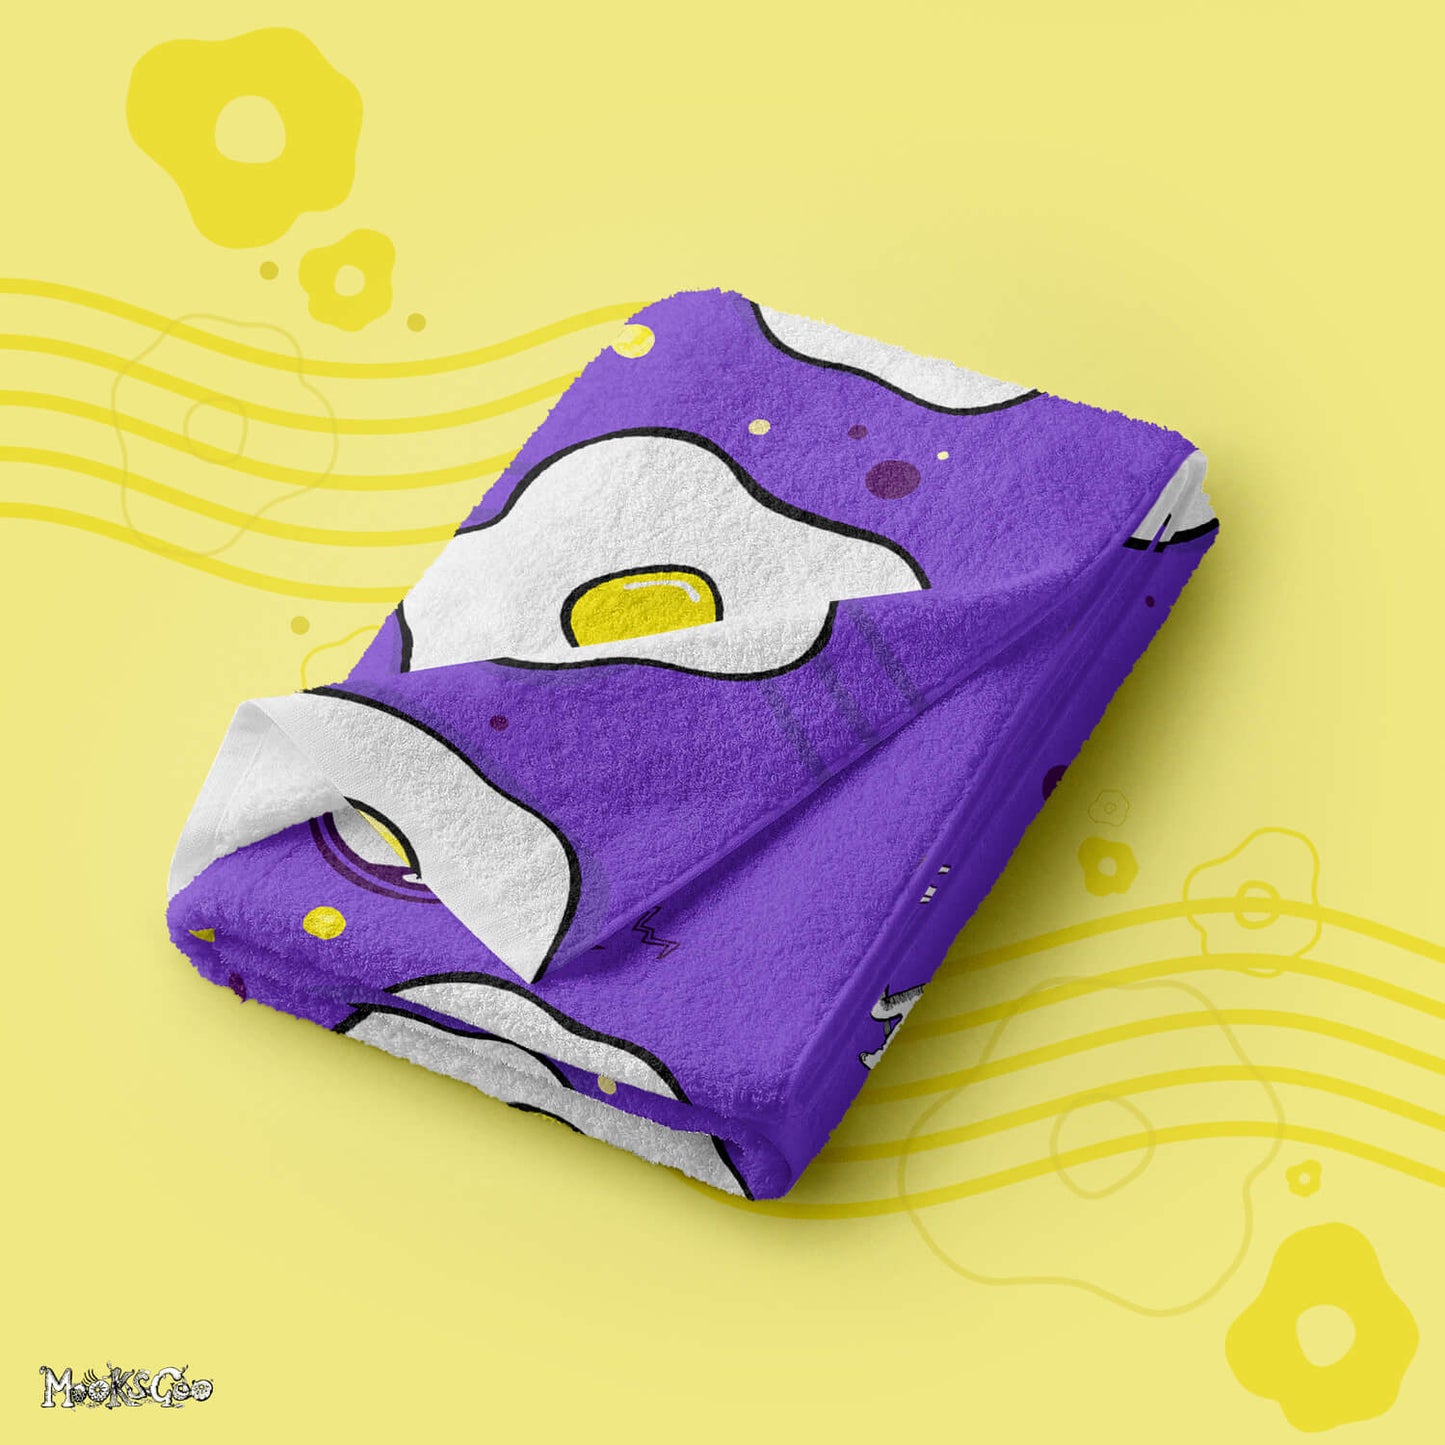 Getting Fried beach or bathroom towel with illustrated fried eggs, folded, designed by MooksGoo